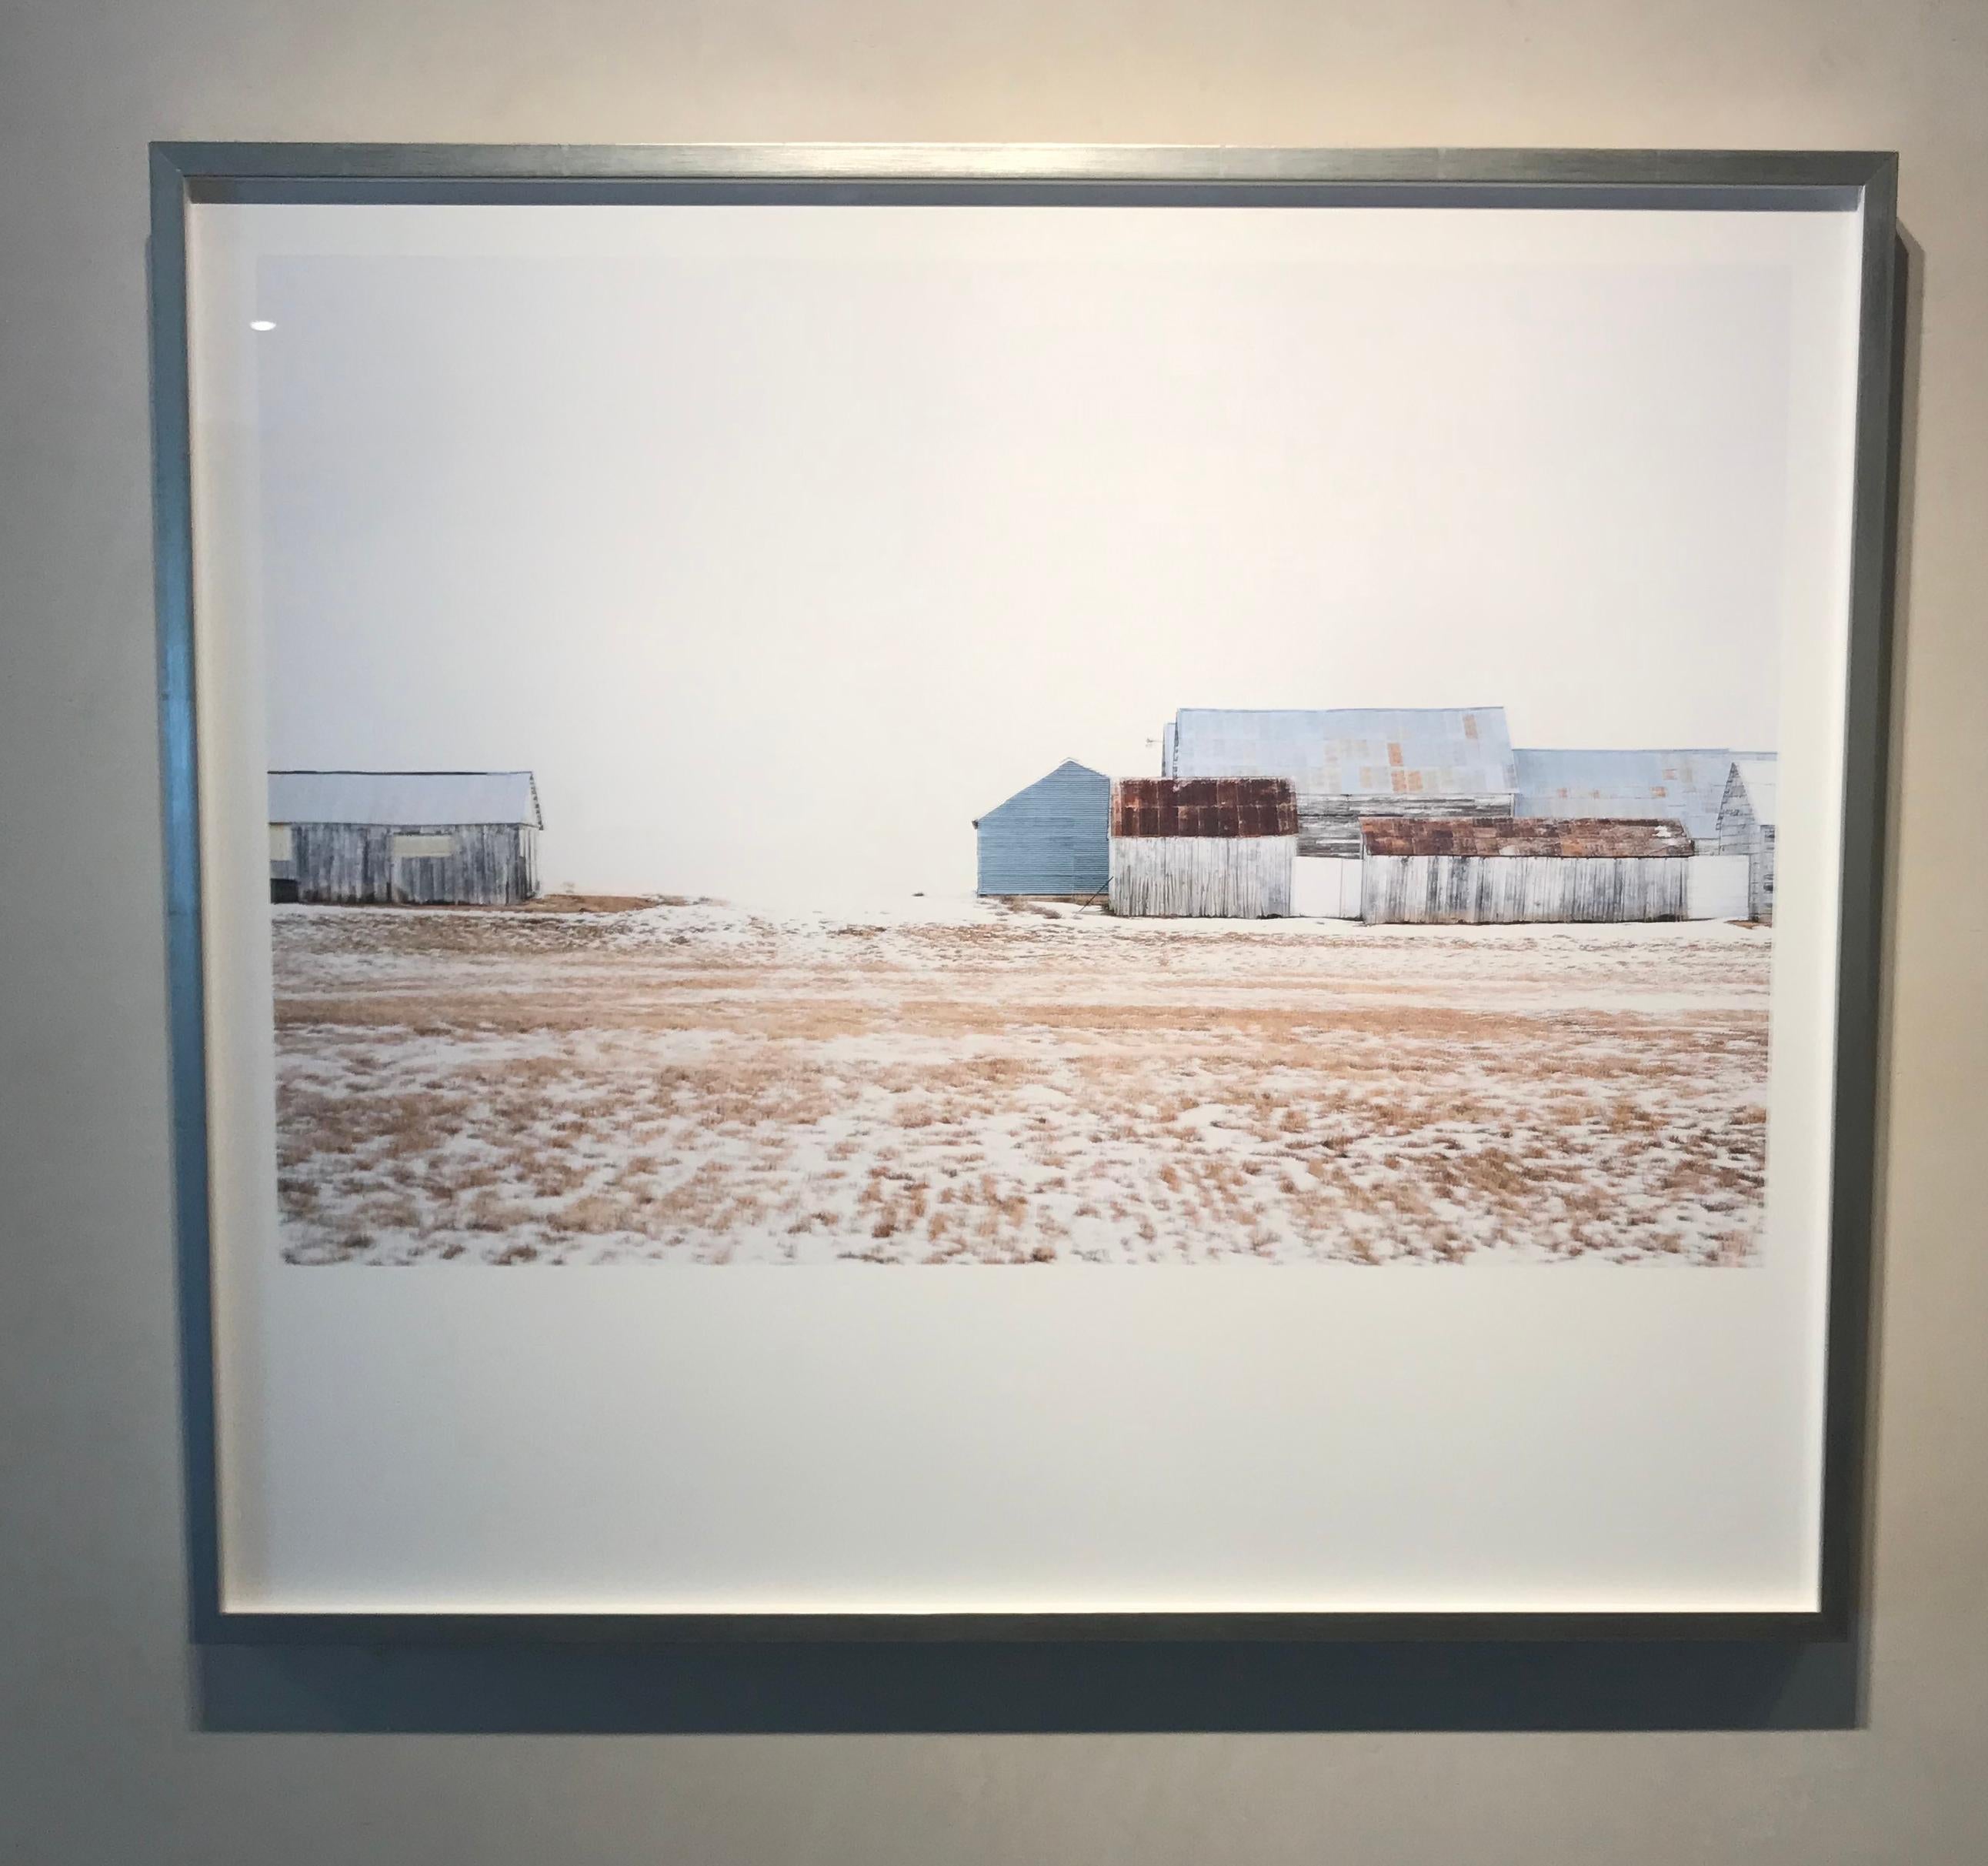 Barns I- color photograph of agricultural building in Idaho framed - Photograph by Wendel Wirth